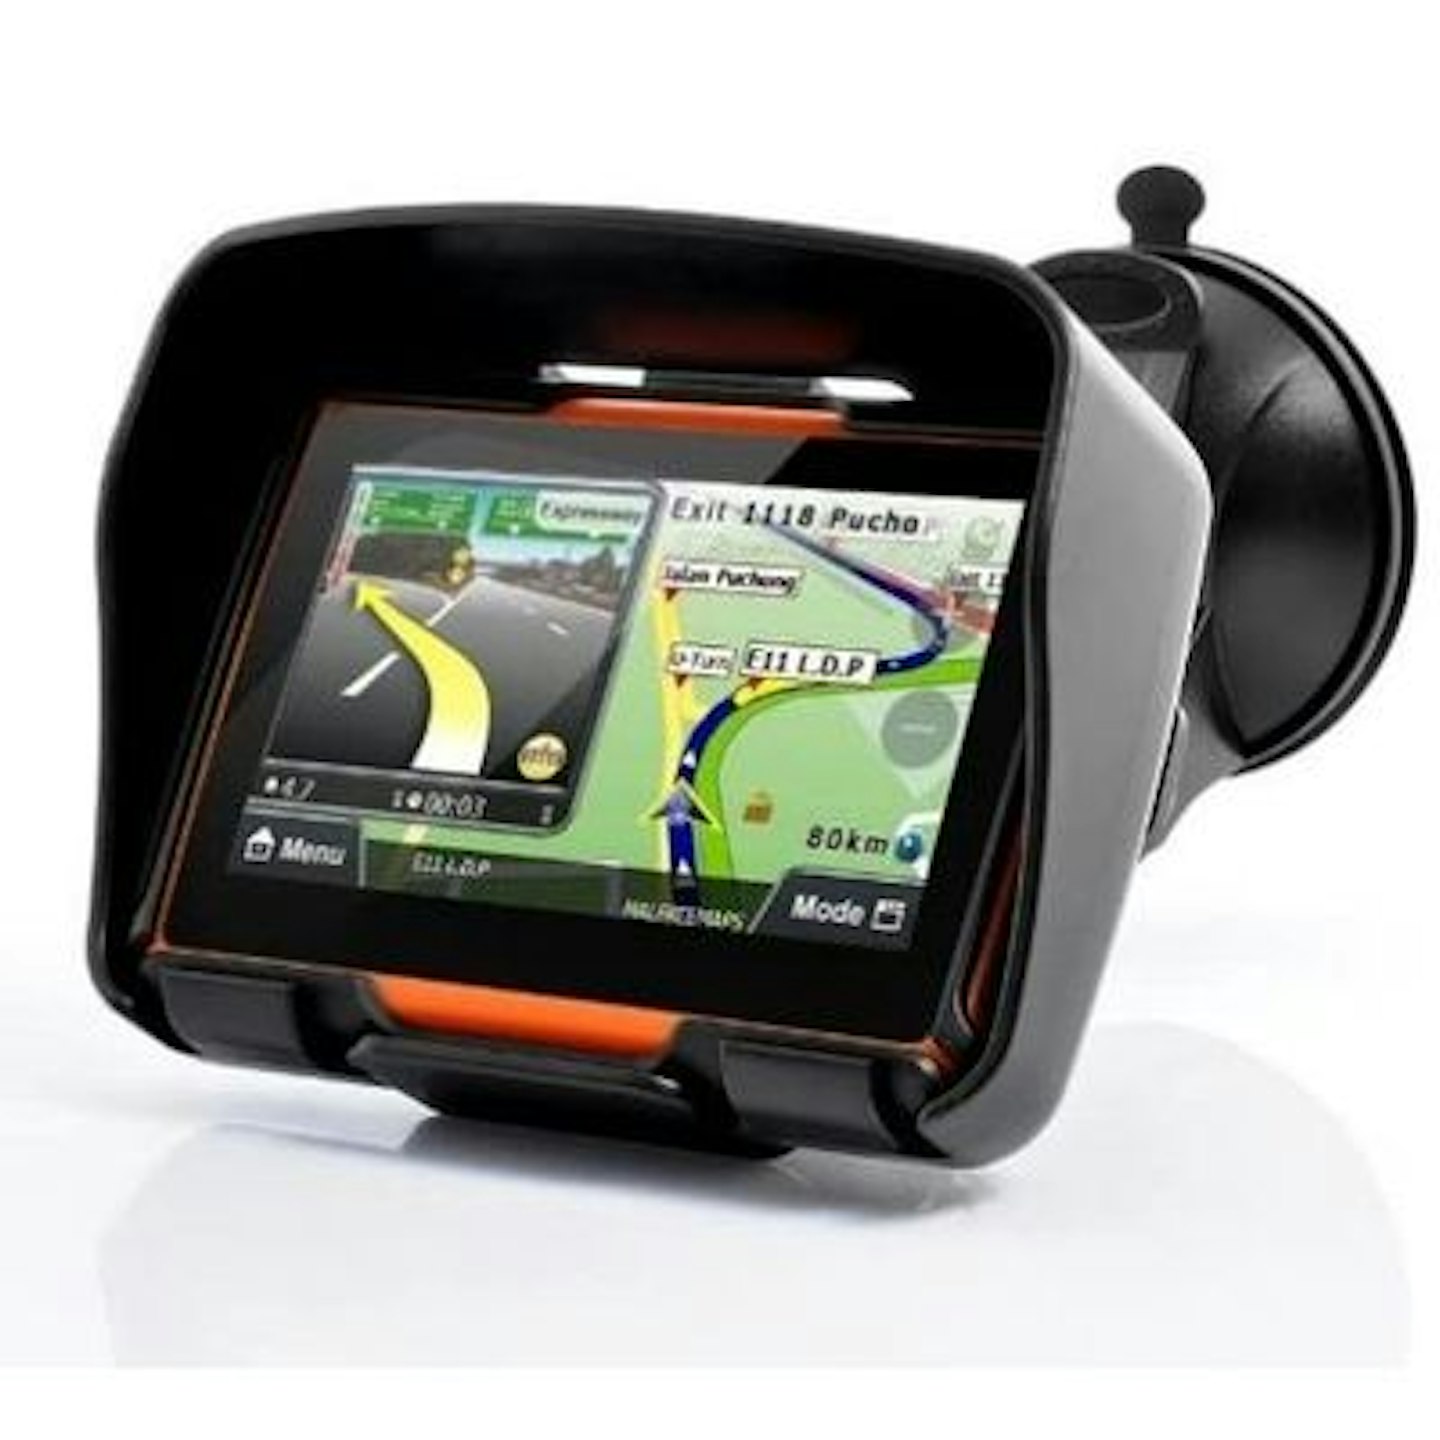 BW All Terrain 4.3 Inch Motorcycle GPS Navigation System